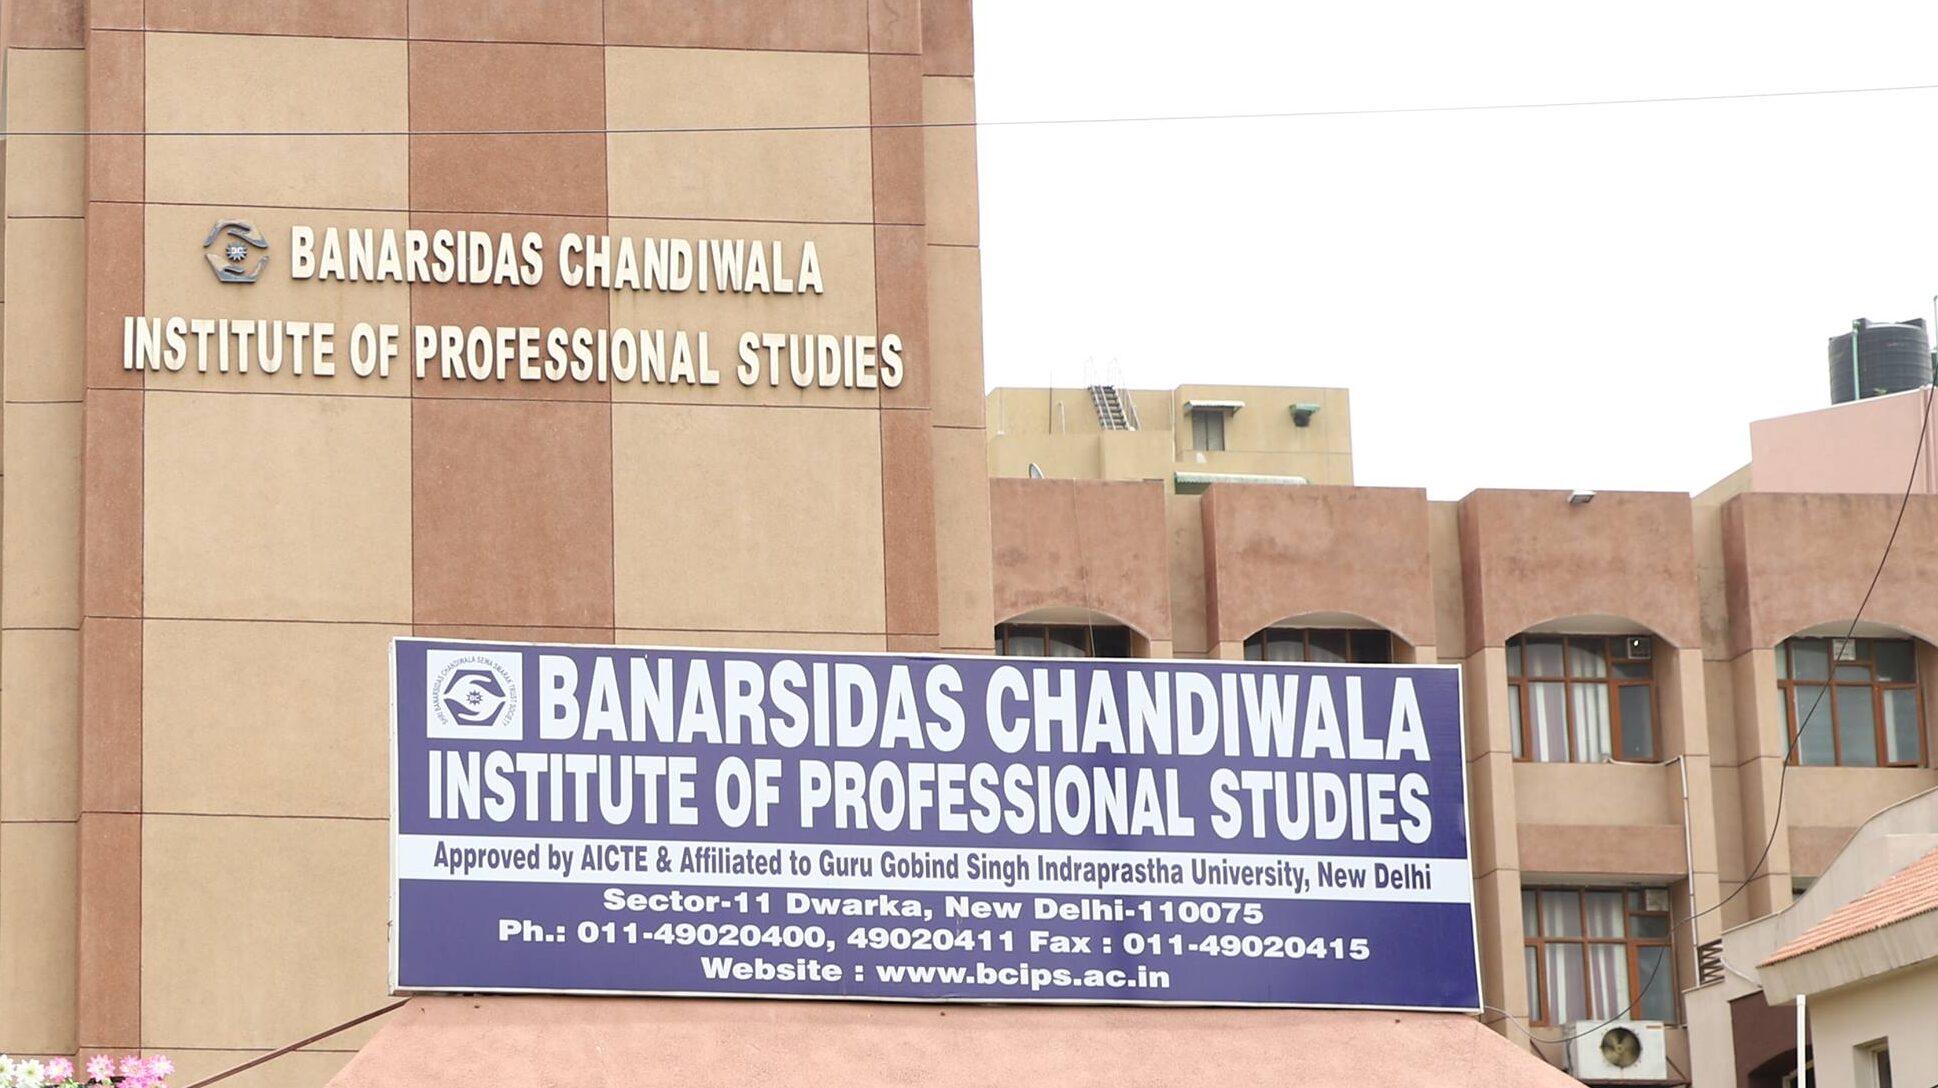 Banarsidas Chandiwala Institute of Professional Studies is one of the famous BBA colleges in Delhi affiliated with GGSIPU.